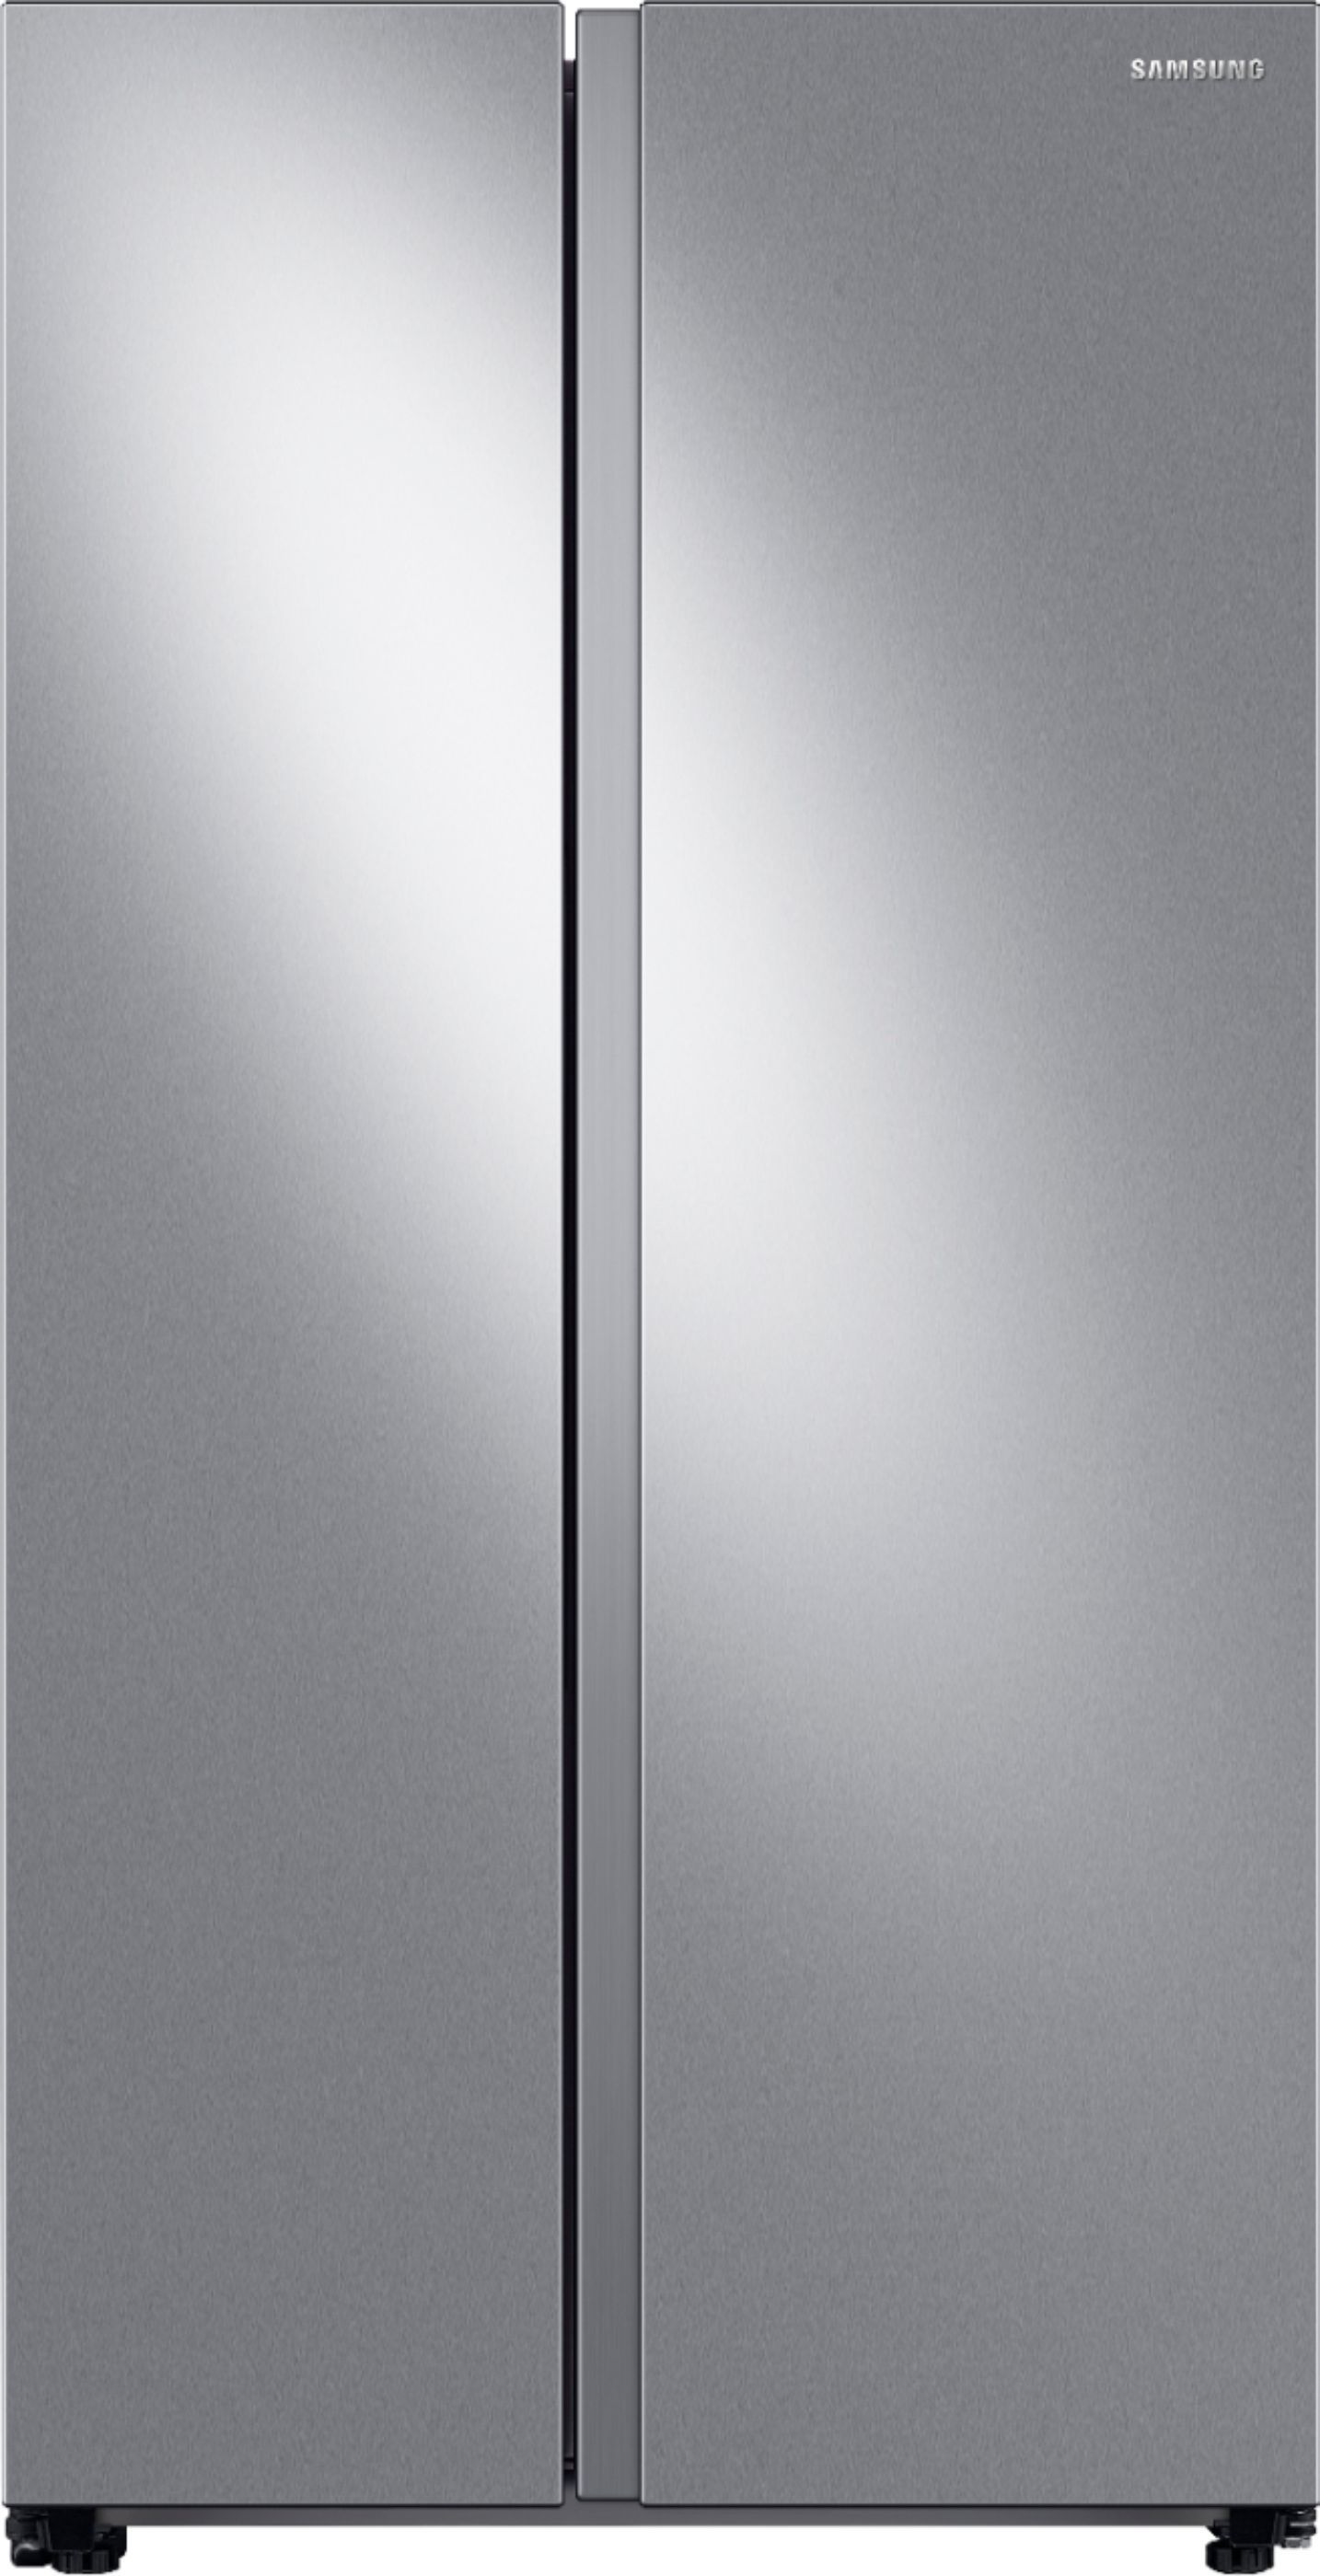 Samsung 28 cu. ft. Side-by-Side Smart Refrigerator with Large Capacity Stainless Steel RS28A500AS... | Best Buy U.S.